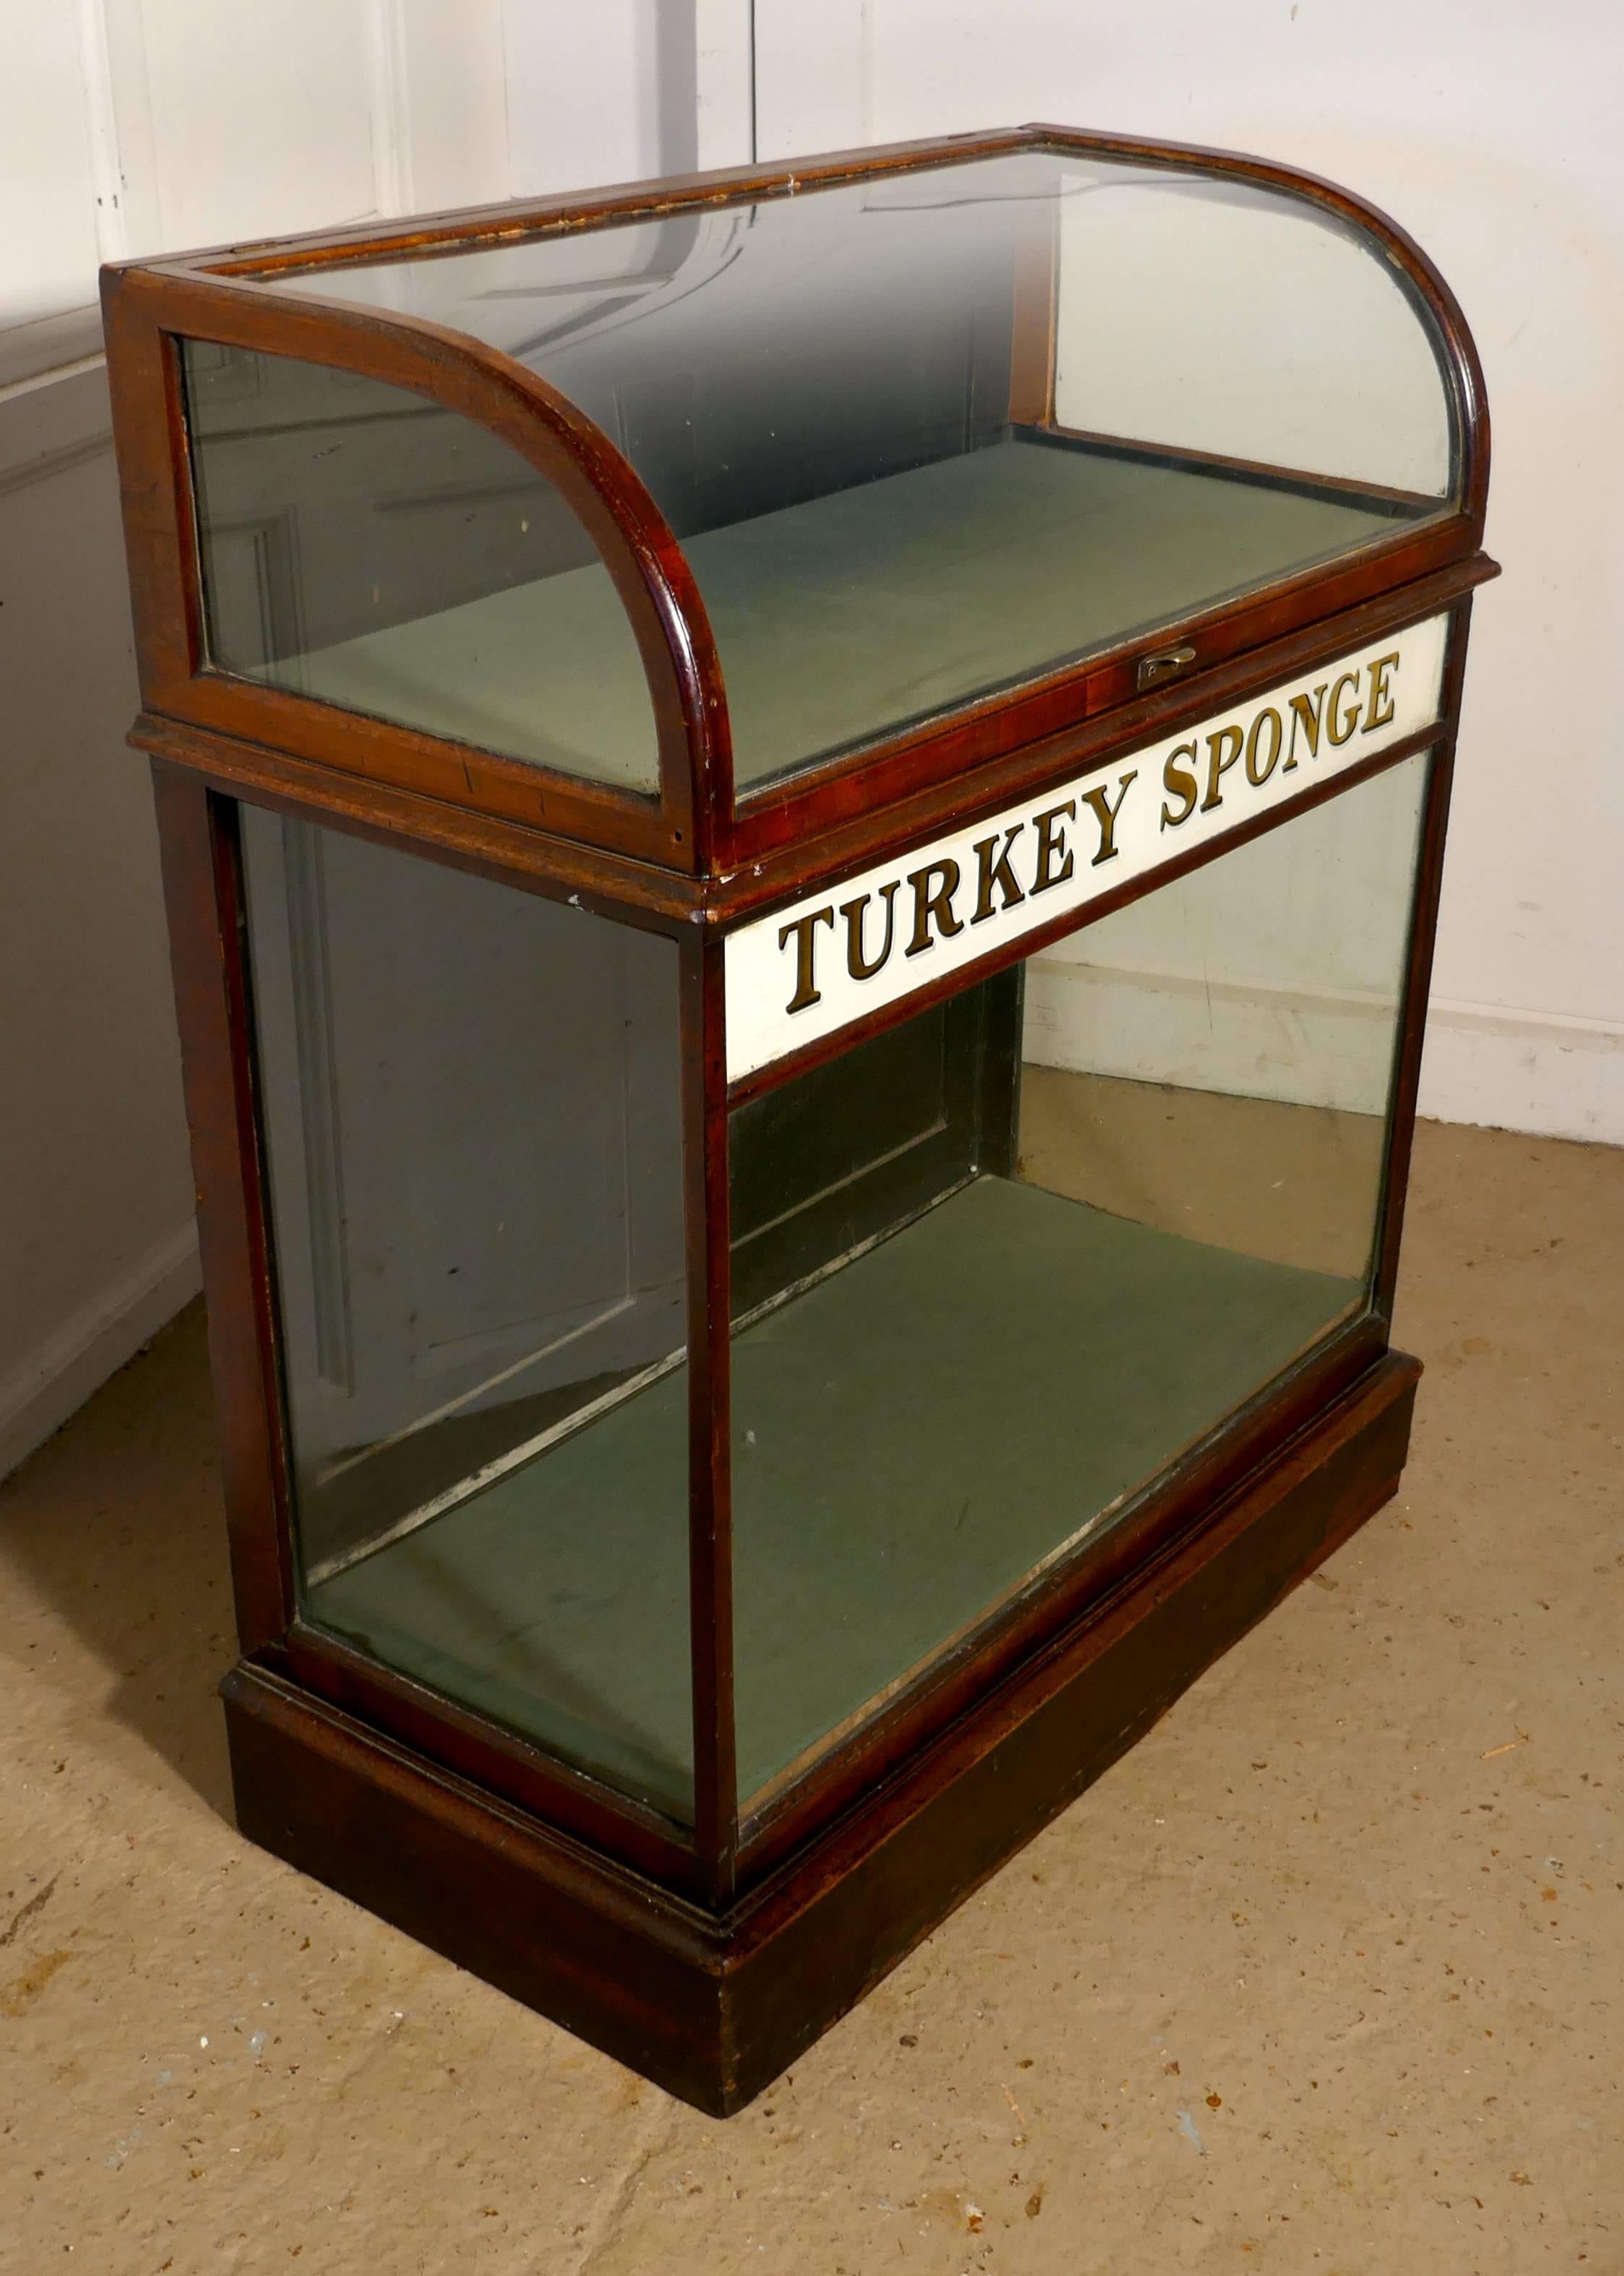 Pharmacy Shop Display Cabinet, Turkey Sponge 

This charming Victorian shop display cabinet is made in plate glass, the top section has a “D” shaped curved glass, which opens up wards, this sits over a larger display area which has mirrored gold